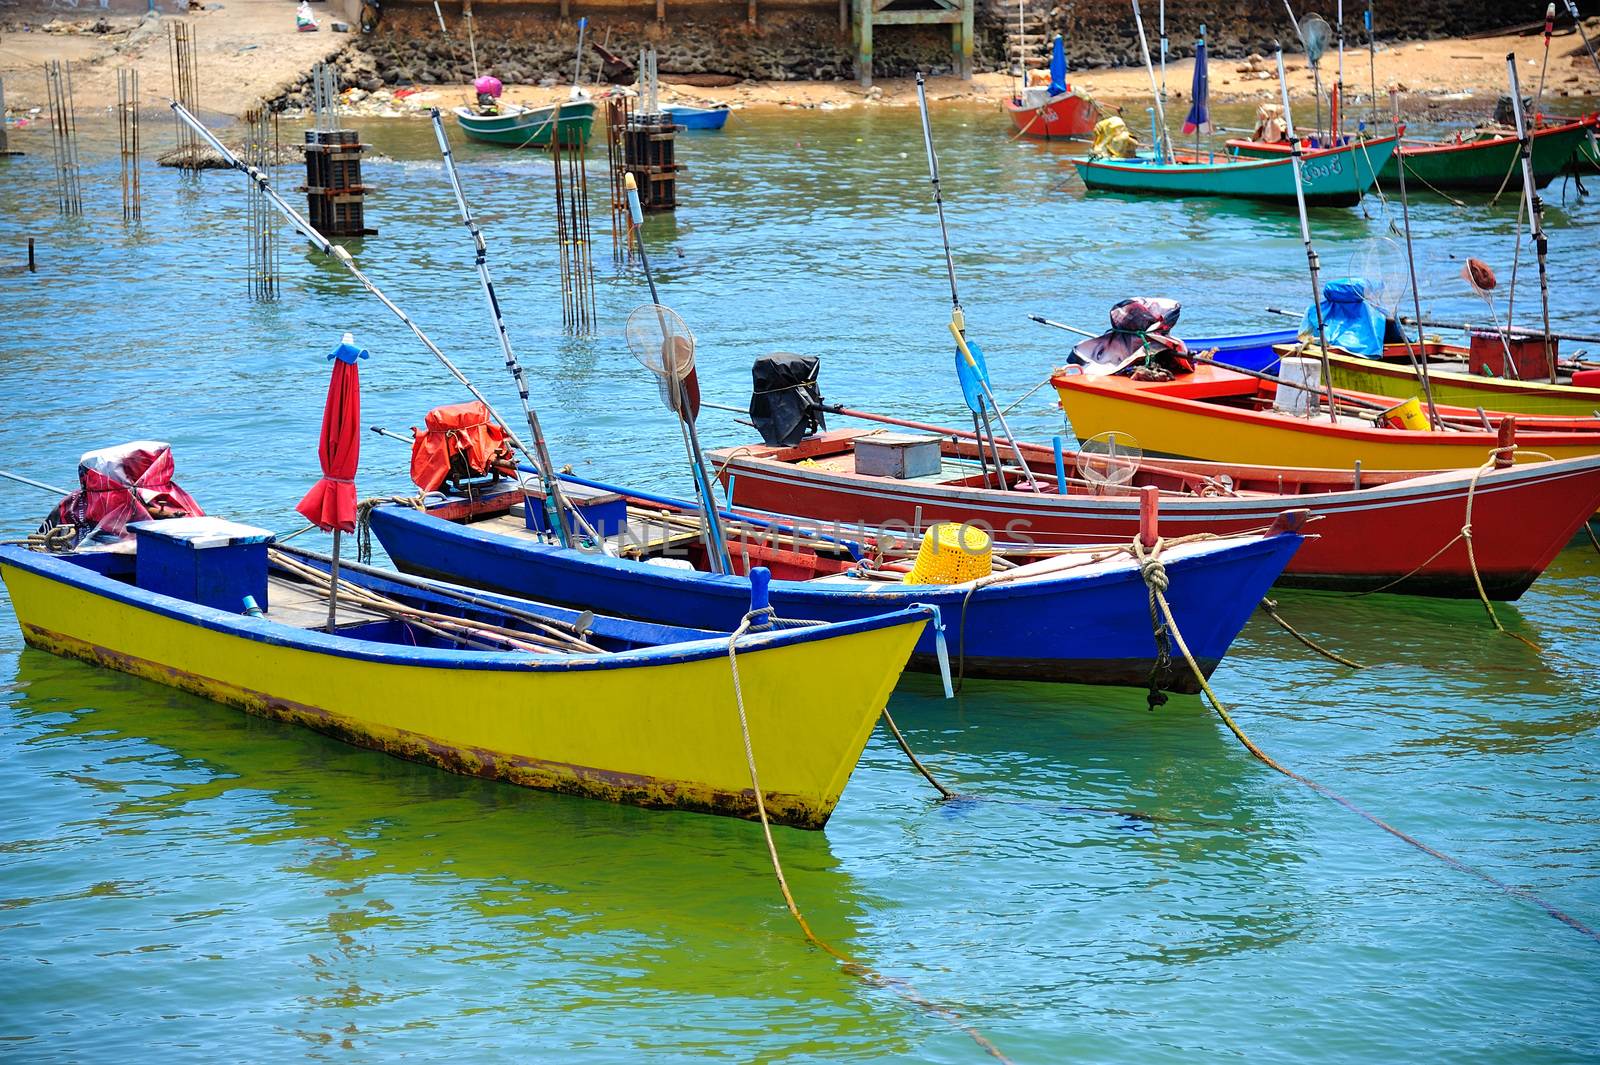 colorful boats in the sea, Koh Larn at pattaya Thailand by think4photop